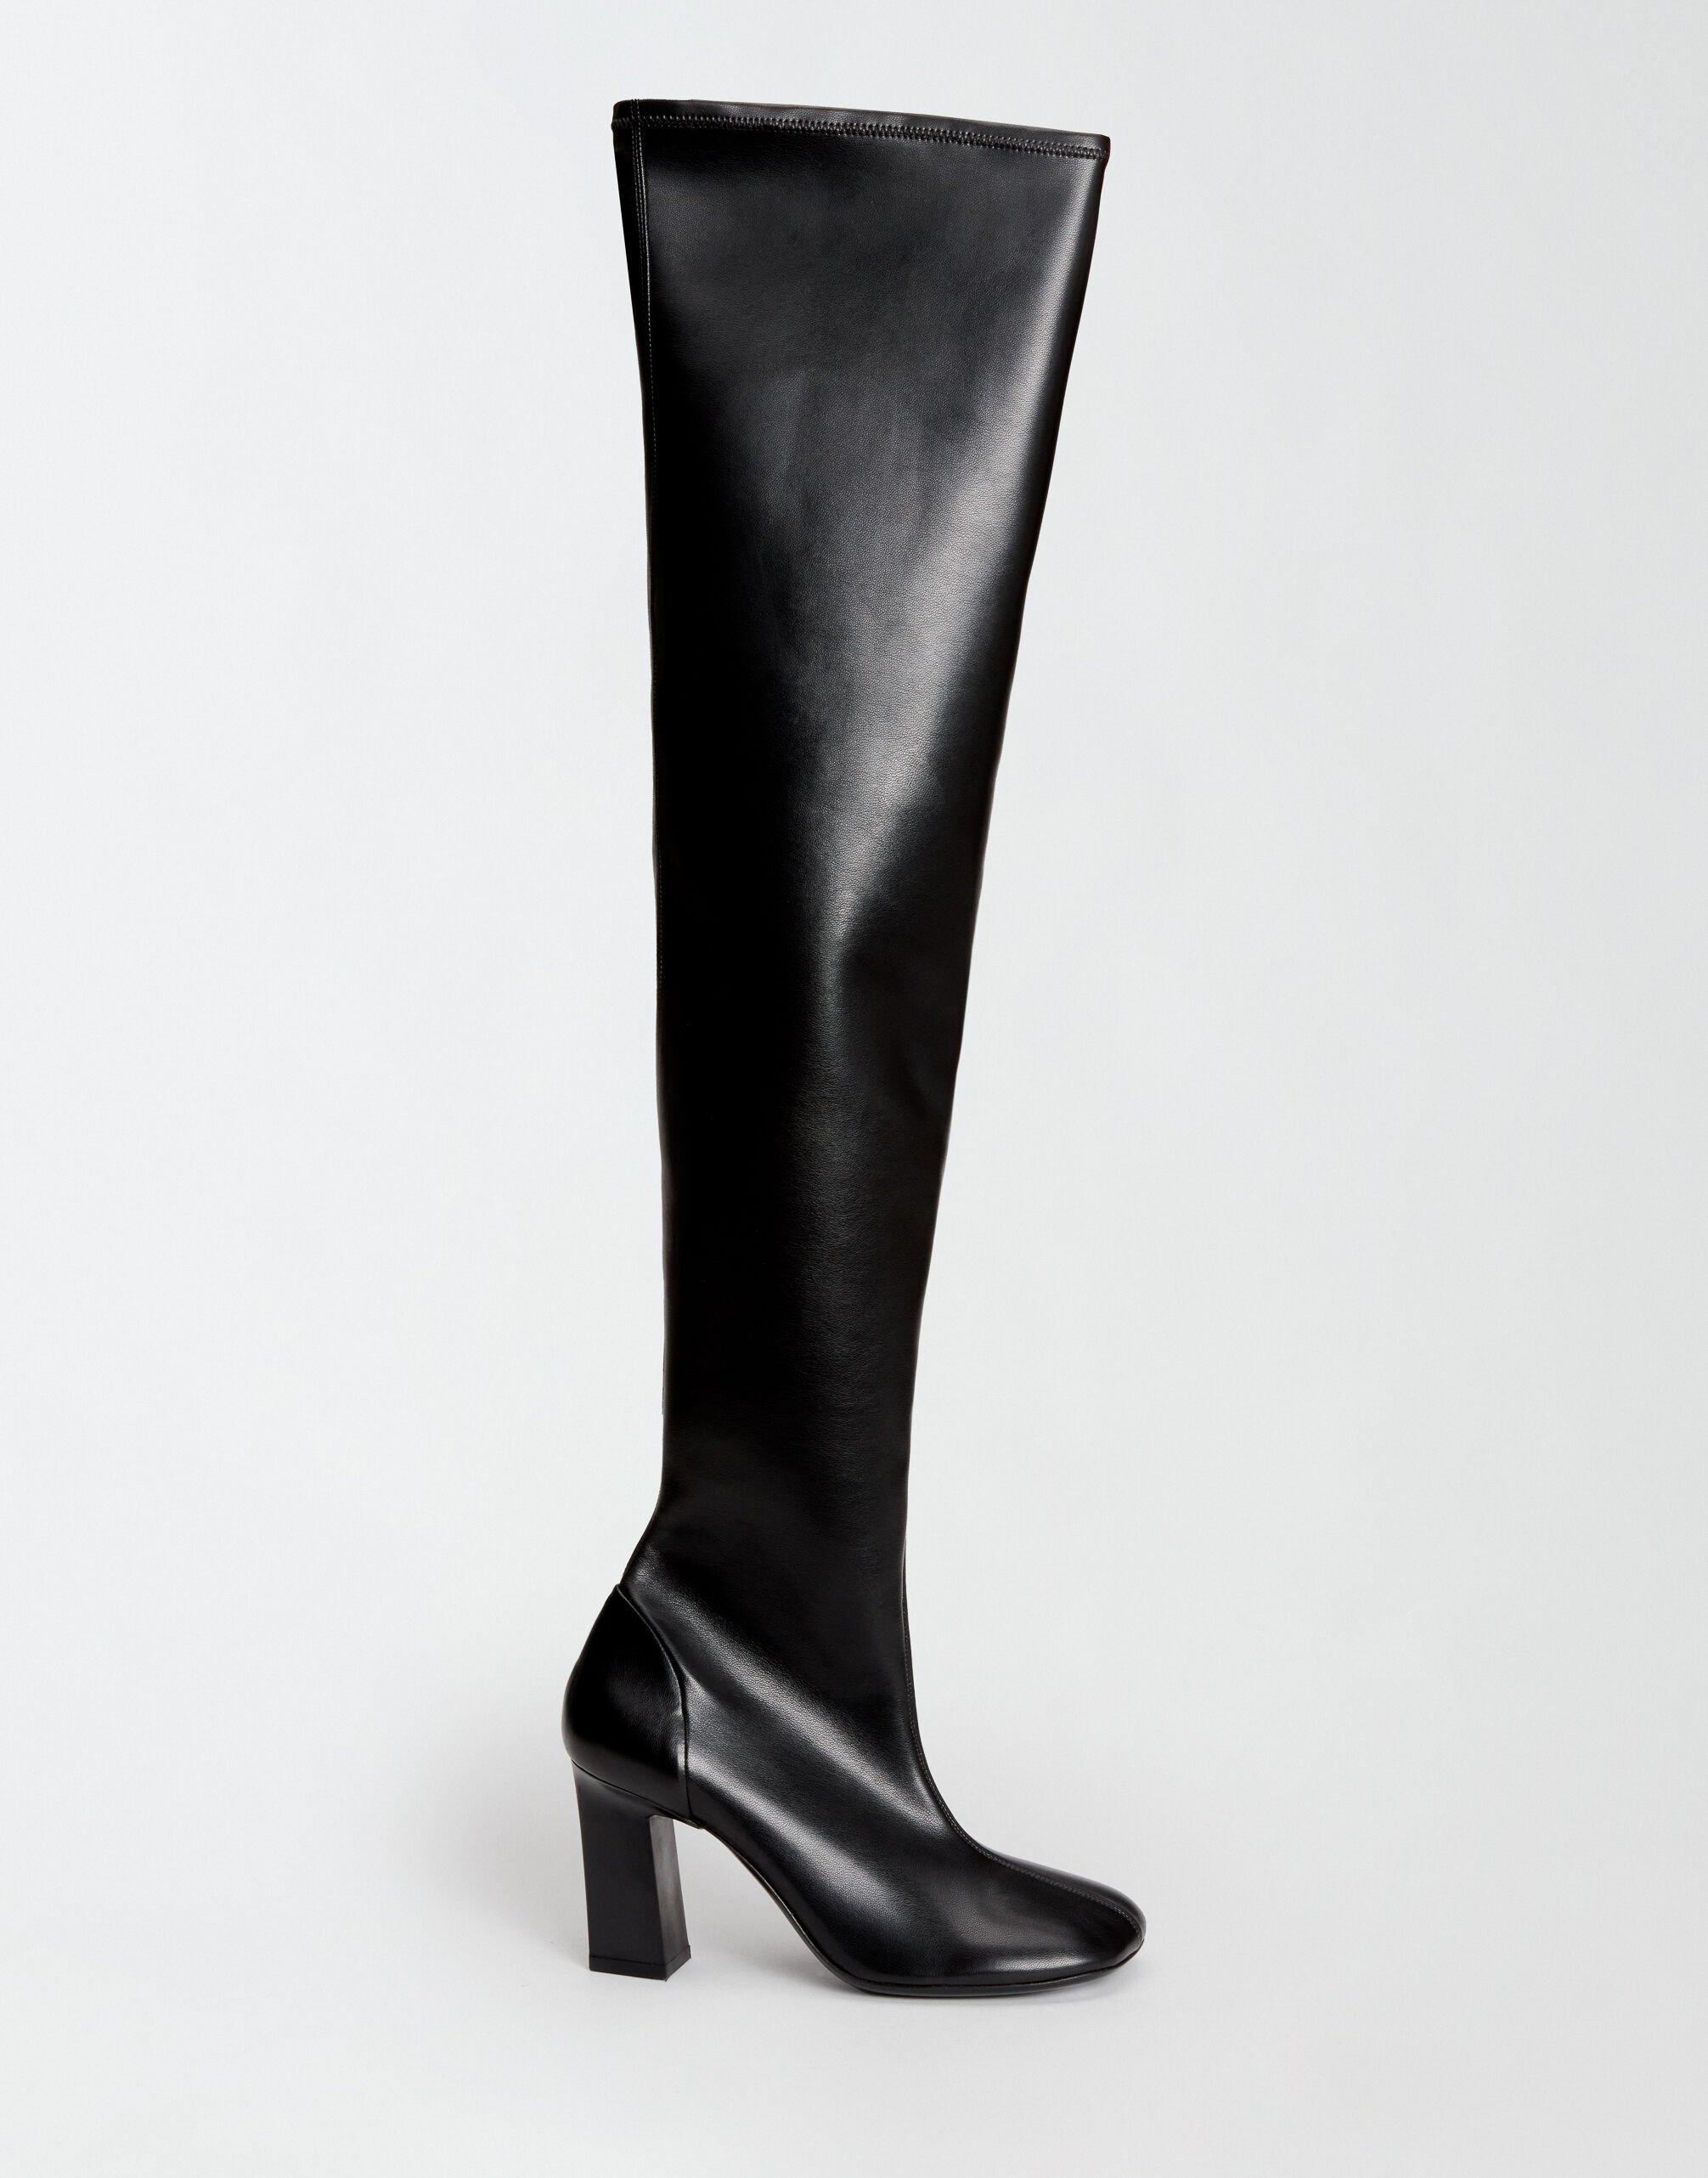 ${brand} Eco leather high boots, black ${colorDescription} ${masterID}